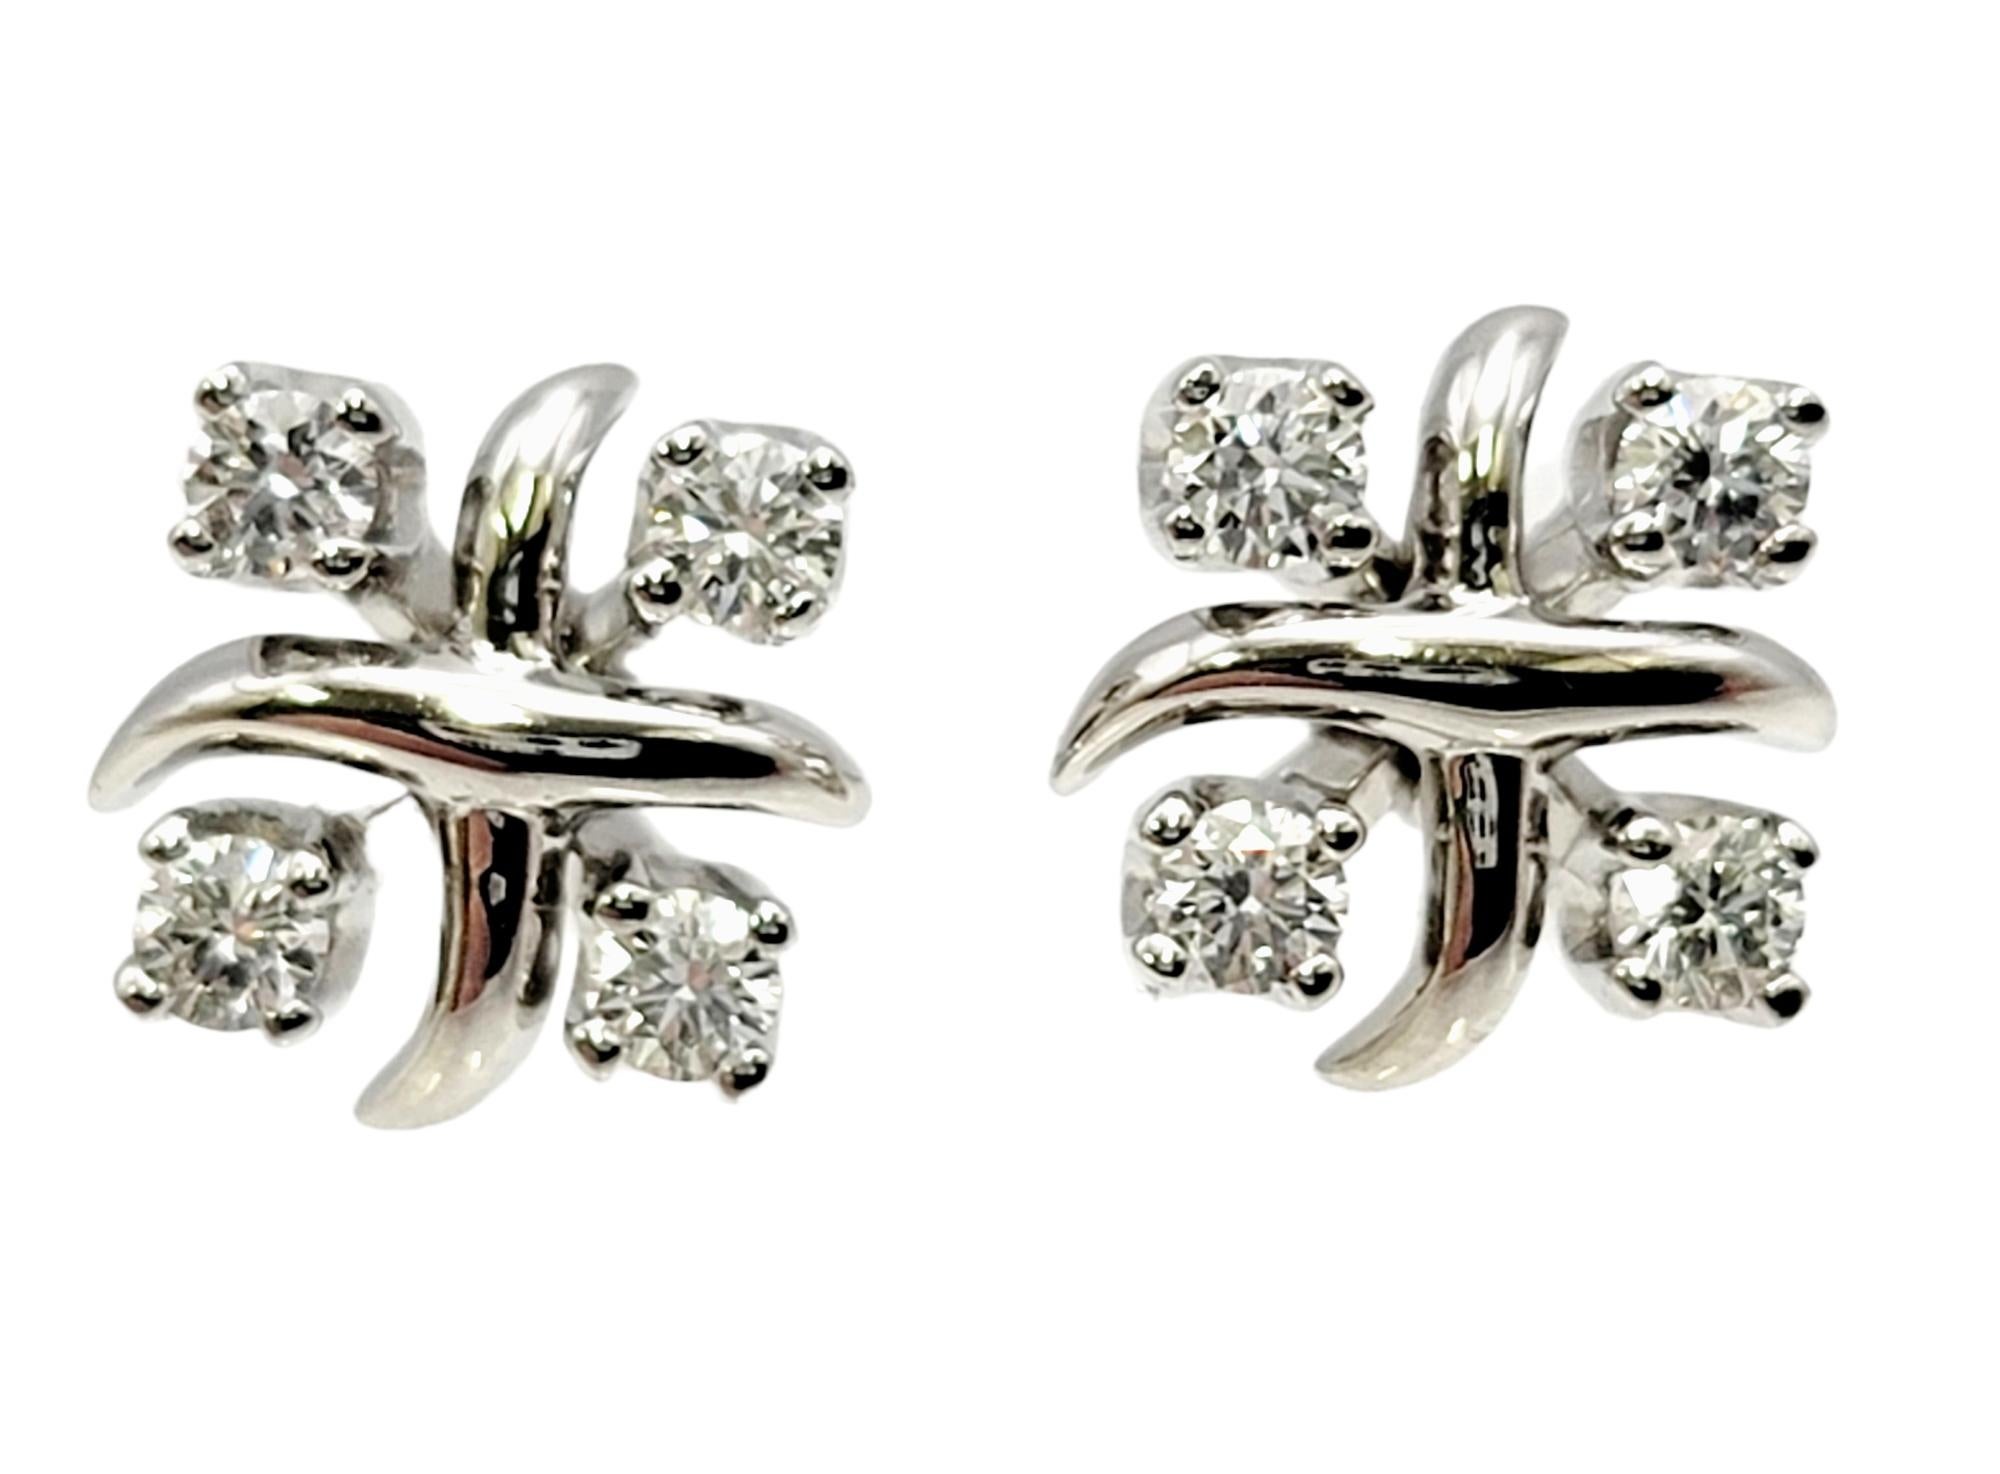 Gorgeous diamond stud earrings with a modern twist designed for Tiffany & Co. by Jean Schlumberger. These sparkling squared 'Lucy' earrings feature 4 round prong set natural diamonds with a polished platinum cross design at the center. These lovely